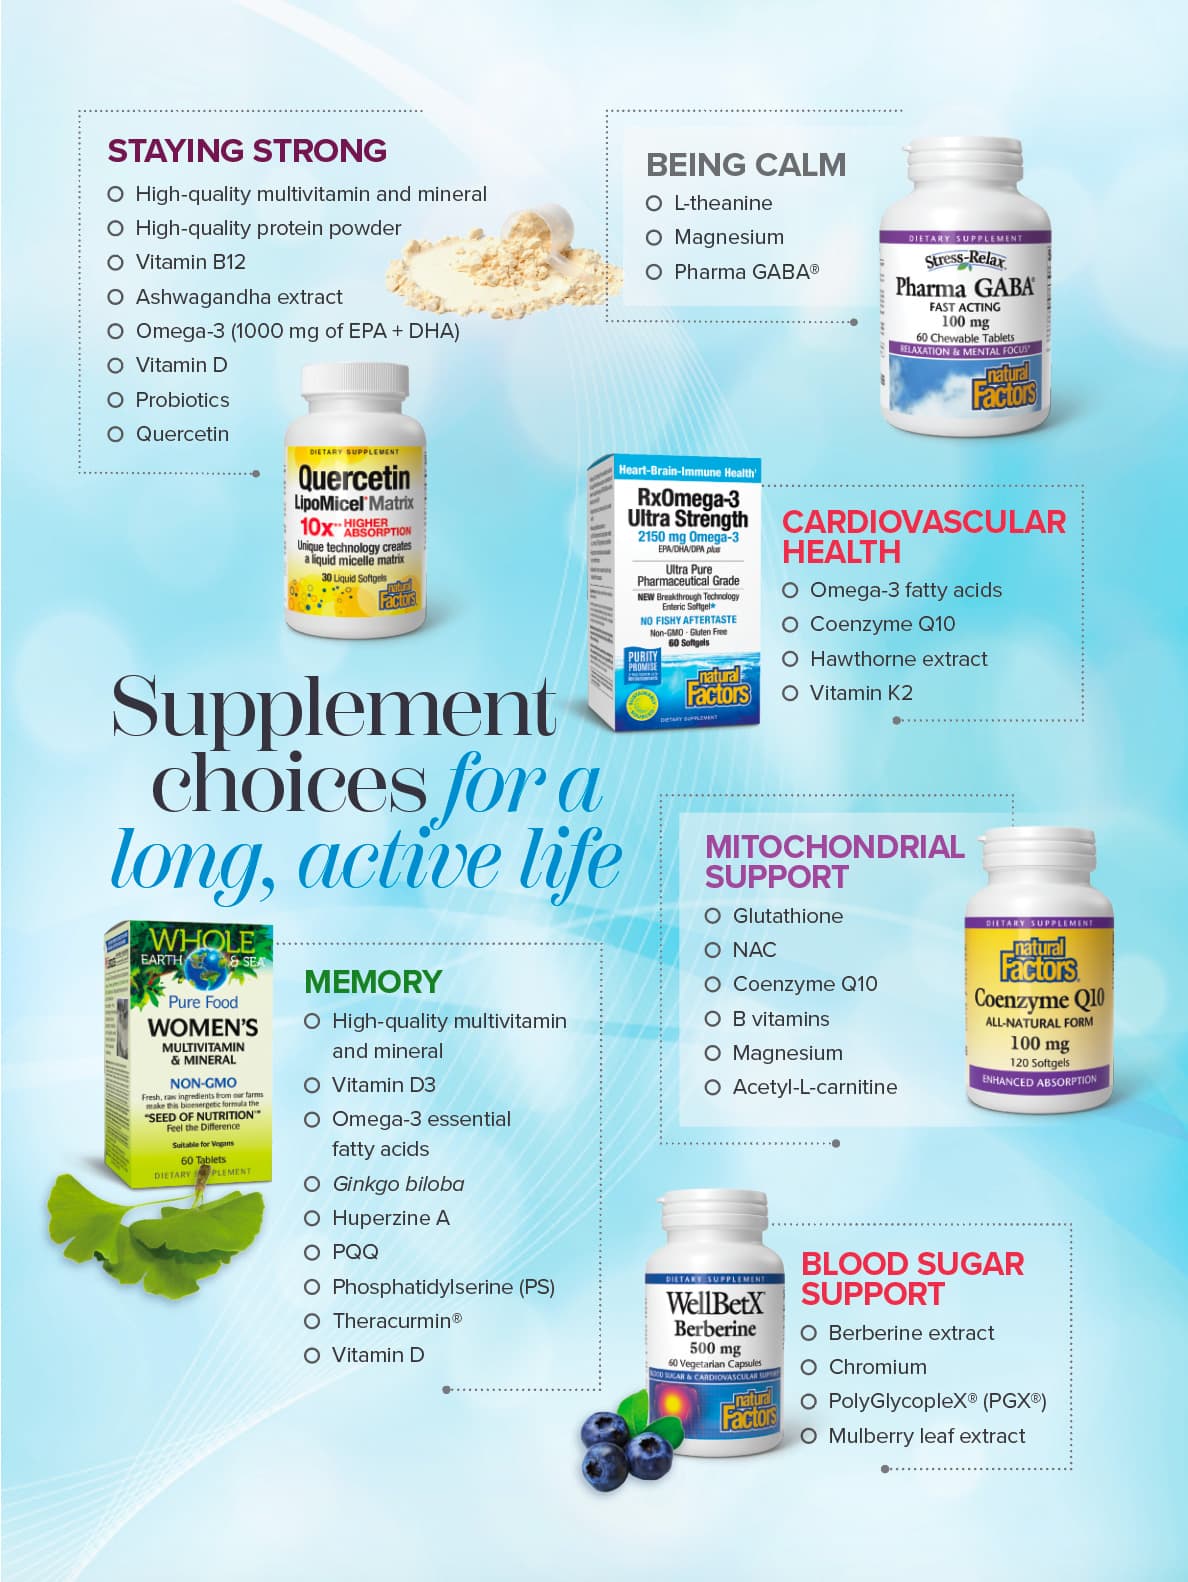 Supplement choices for a long, active life.